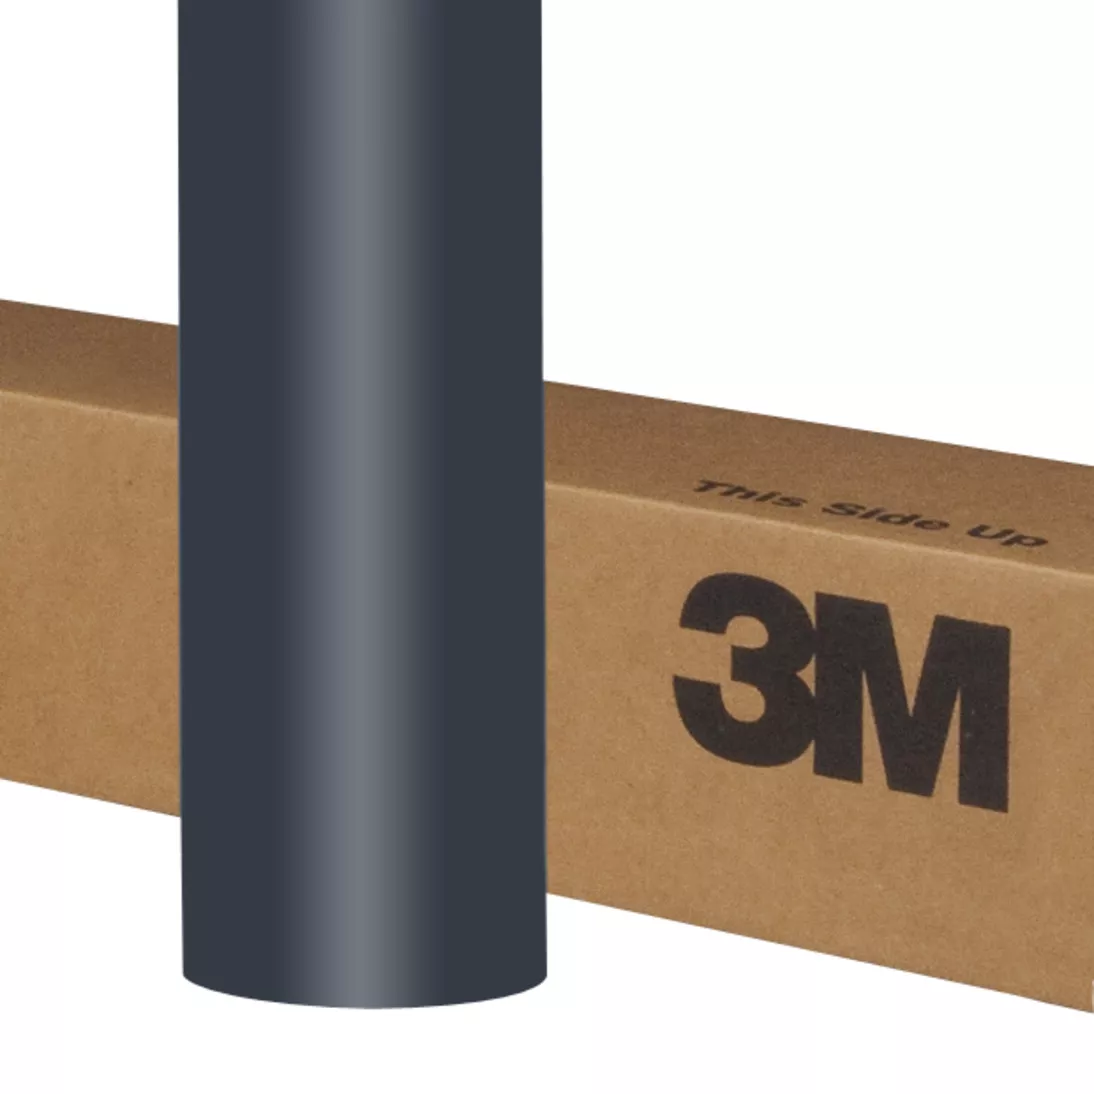 3M™ Controltac™ Graphic Film with Comply™ Adhesive 180mC-8020, Silver
Blue Metallic, 48 in x 50 yd, 1 Roll/Case